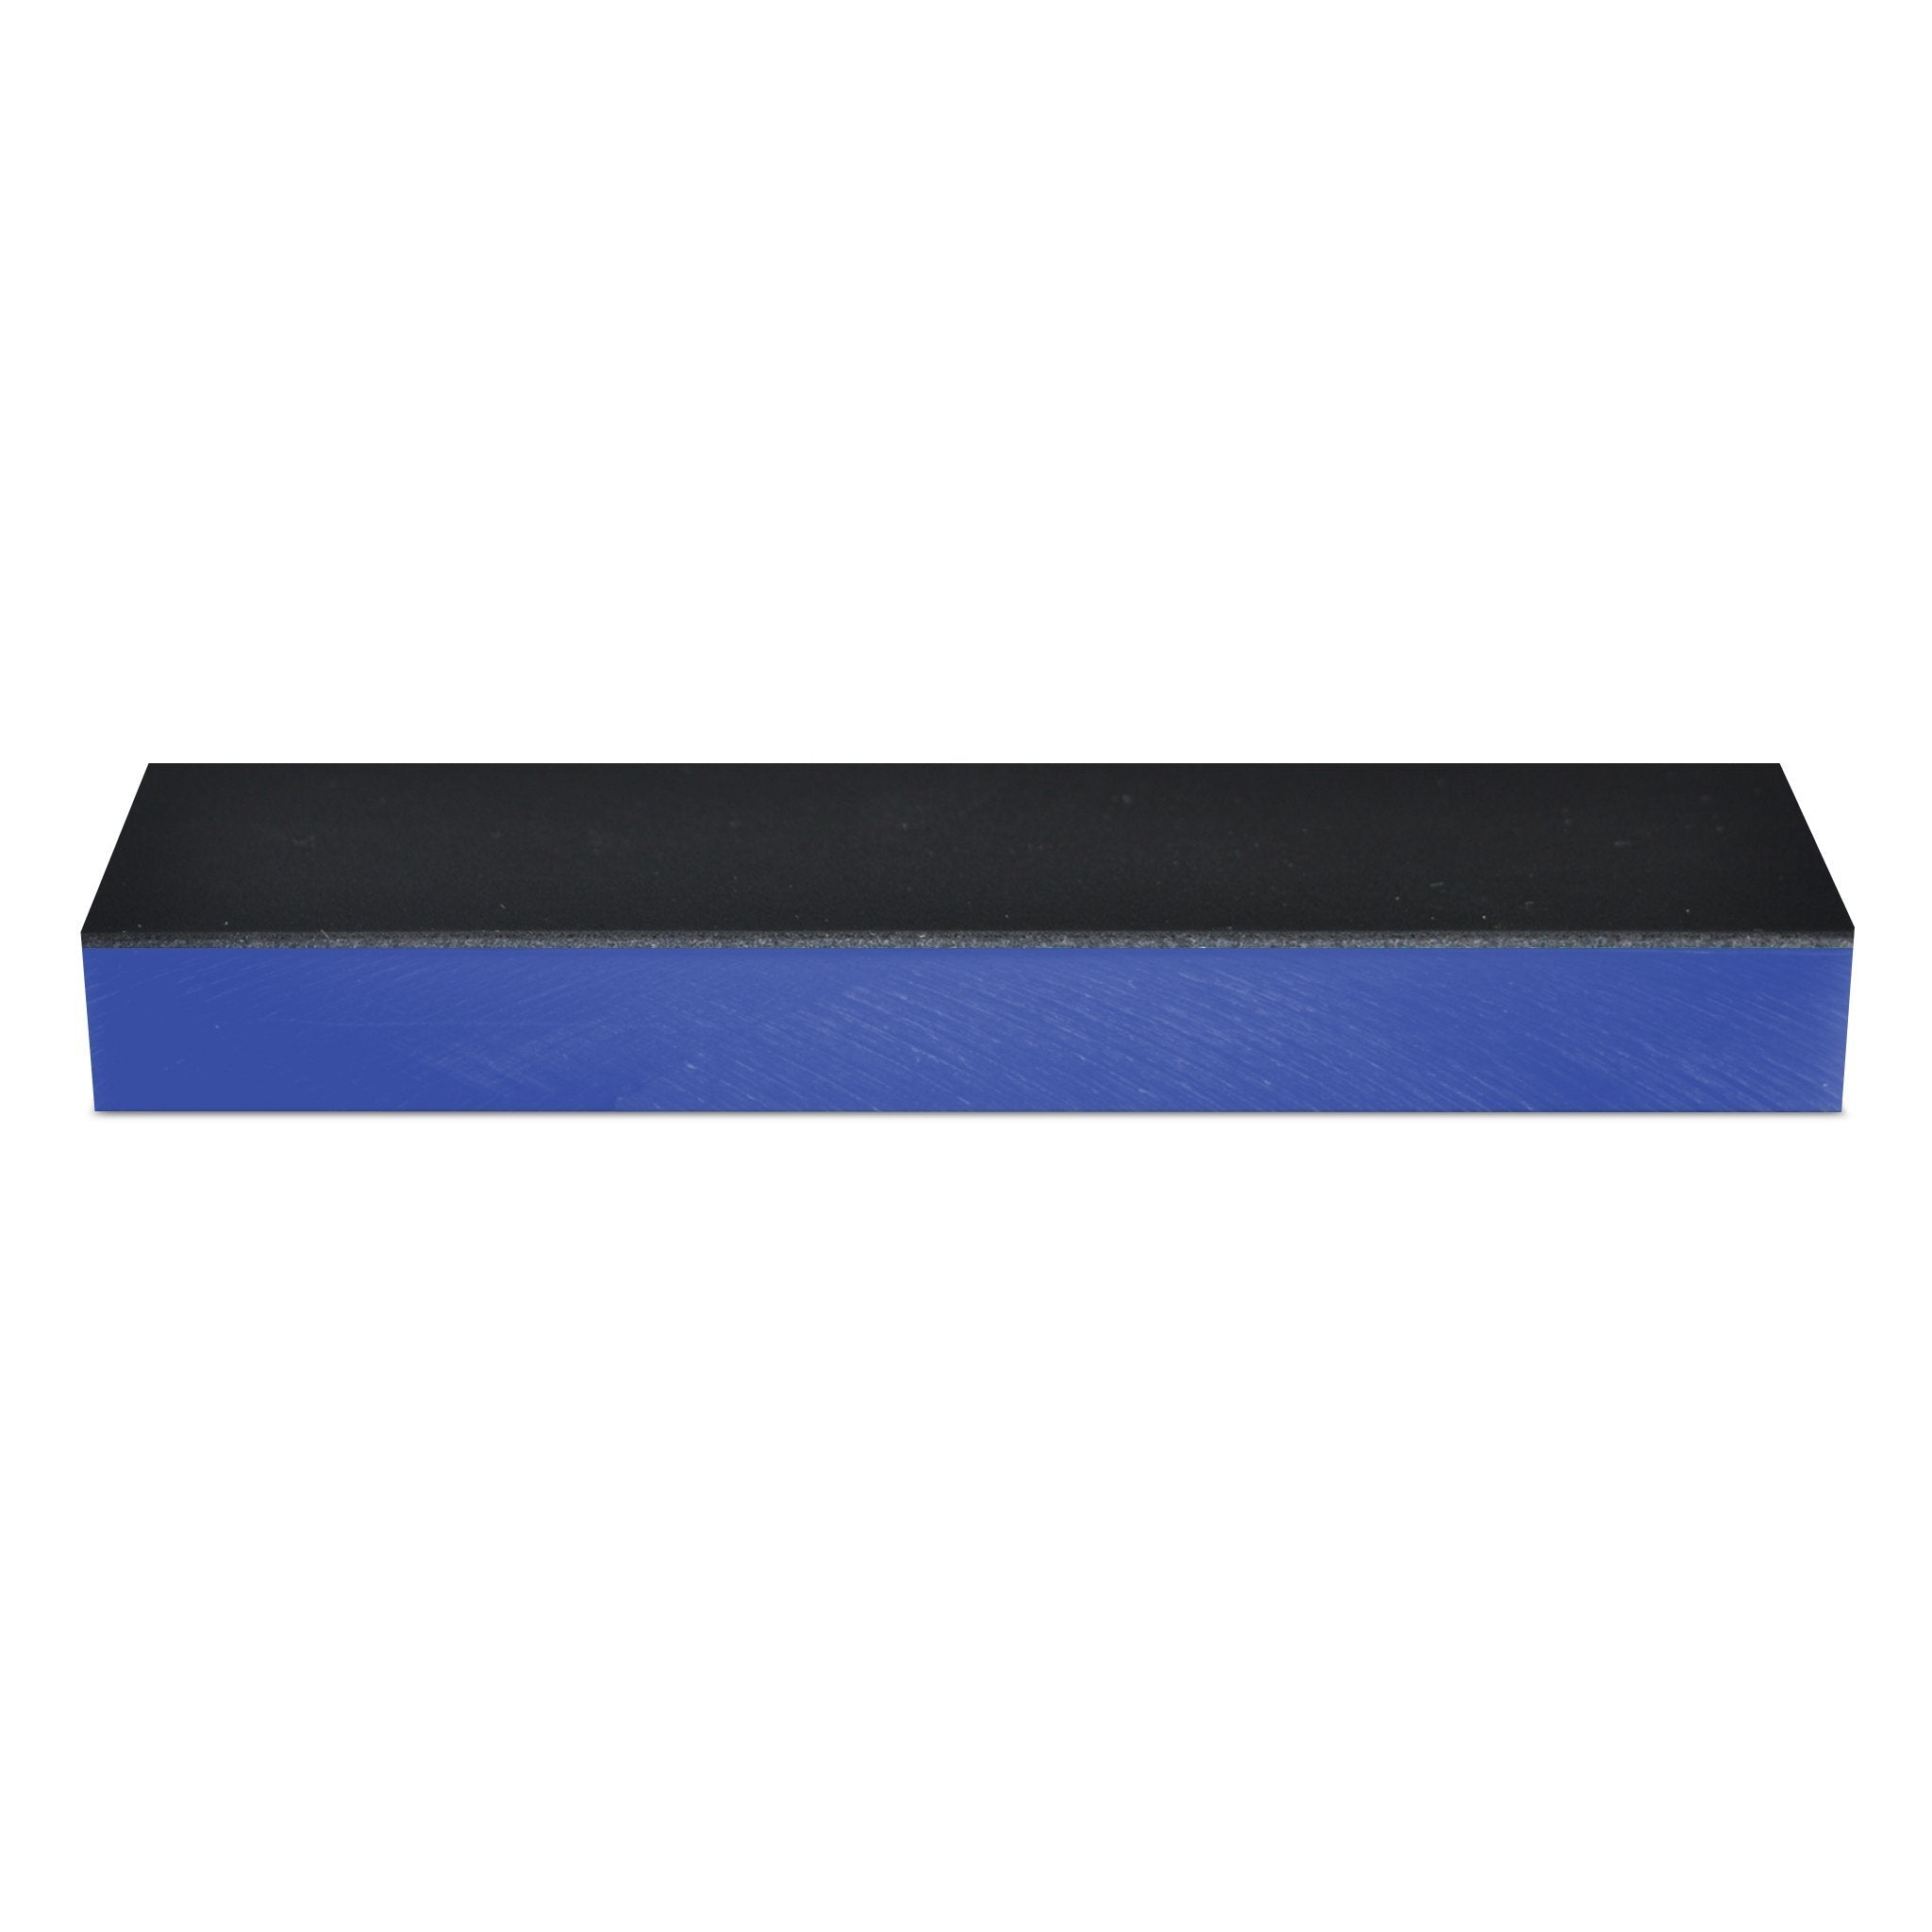 213 x 70 Jende Nano Cloth Strop All Grit Kit coloured perspex with strop material on top